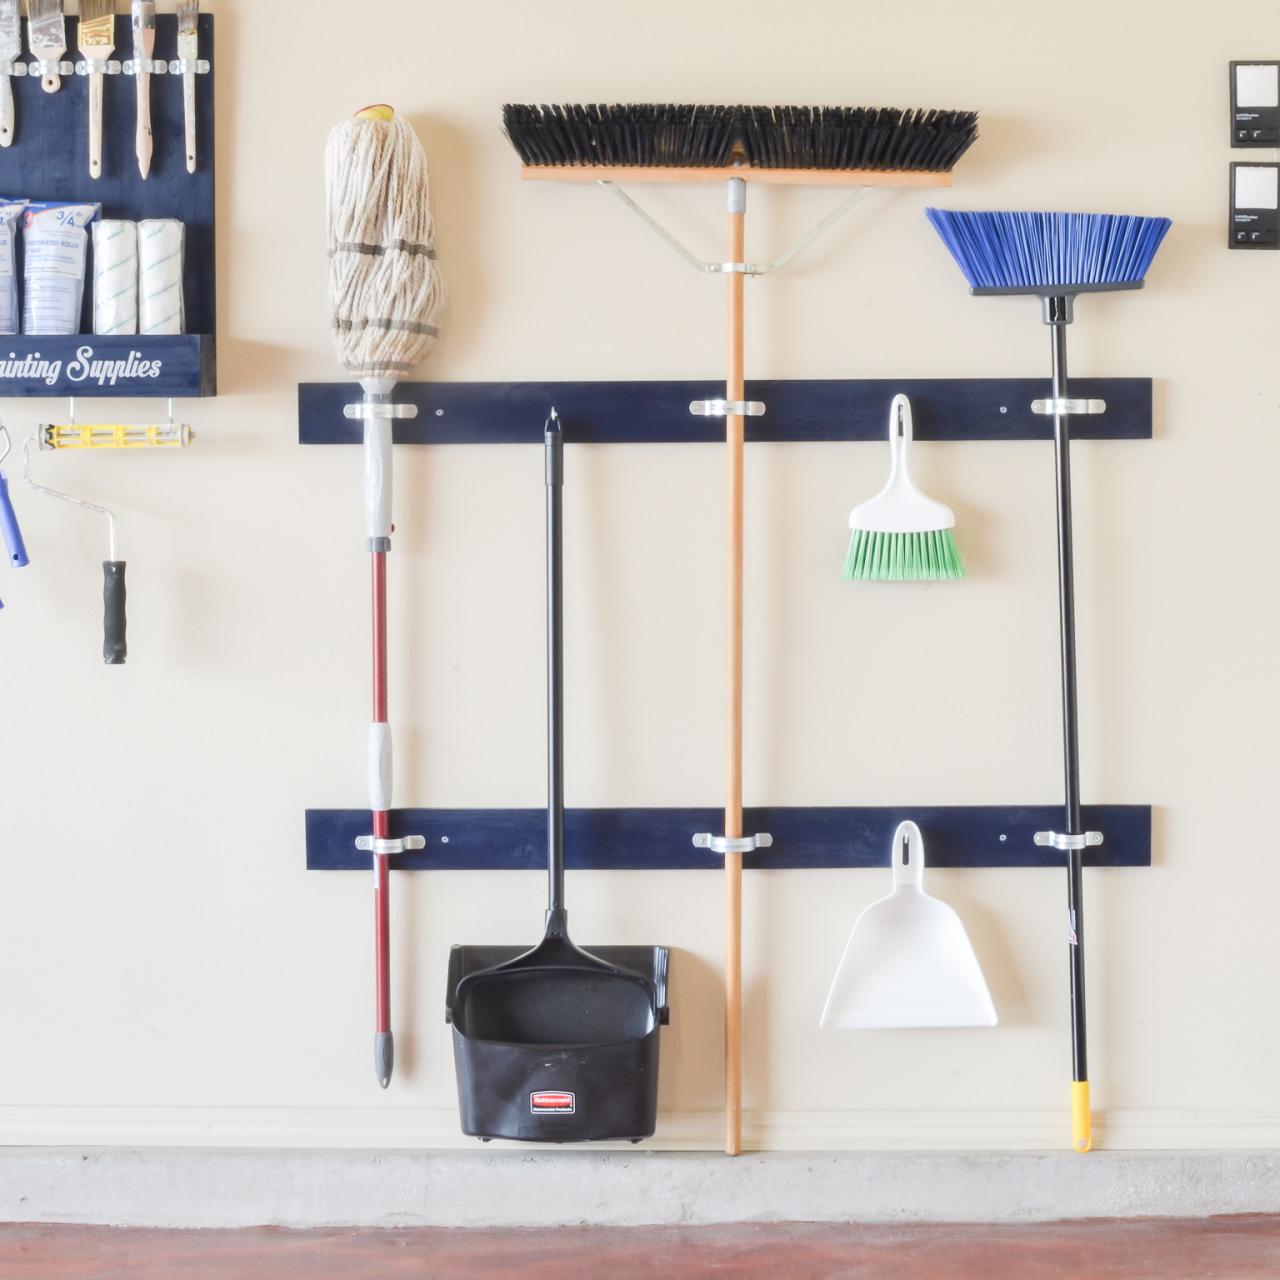 How To Best Organize & Store Your Cleaning Supplies